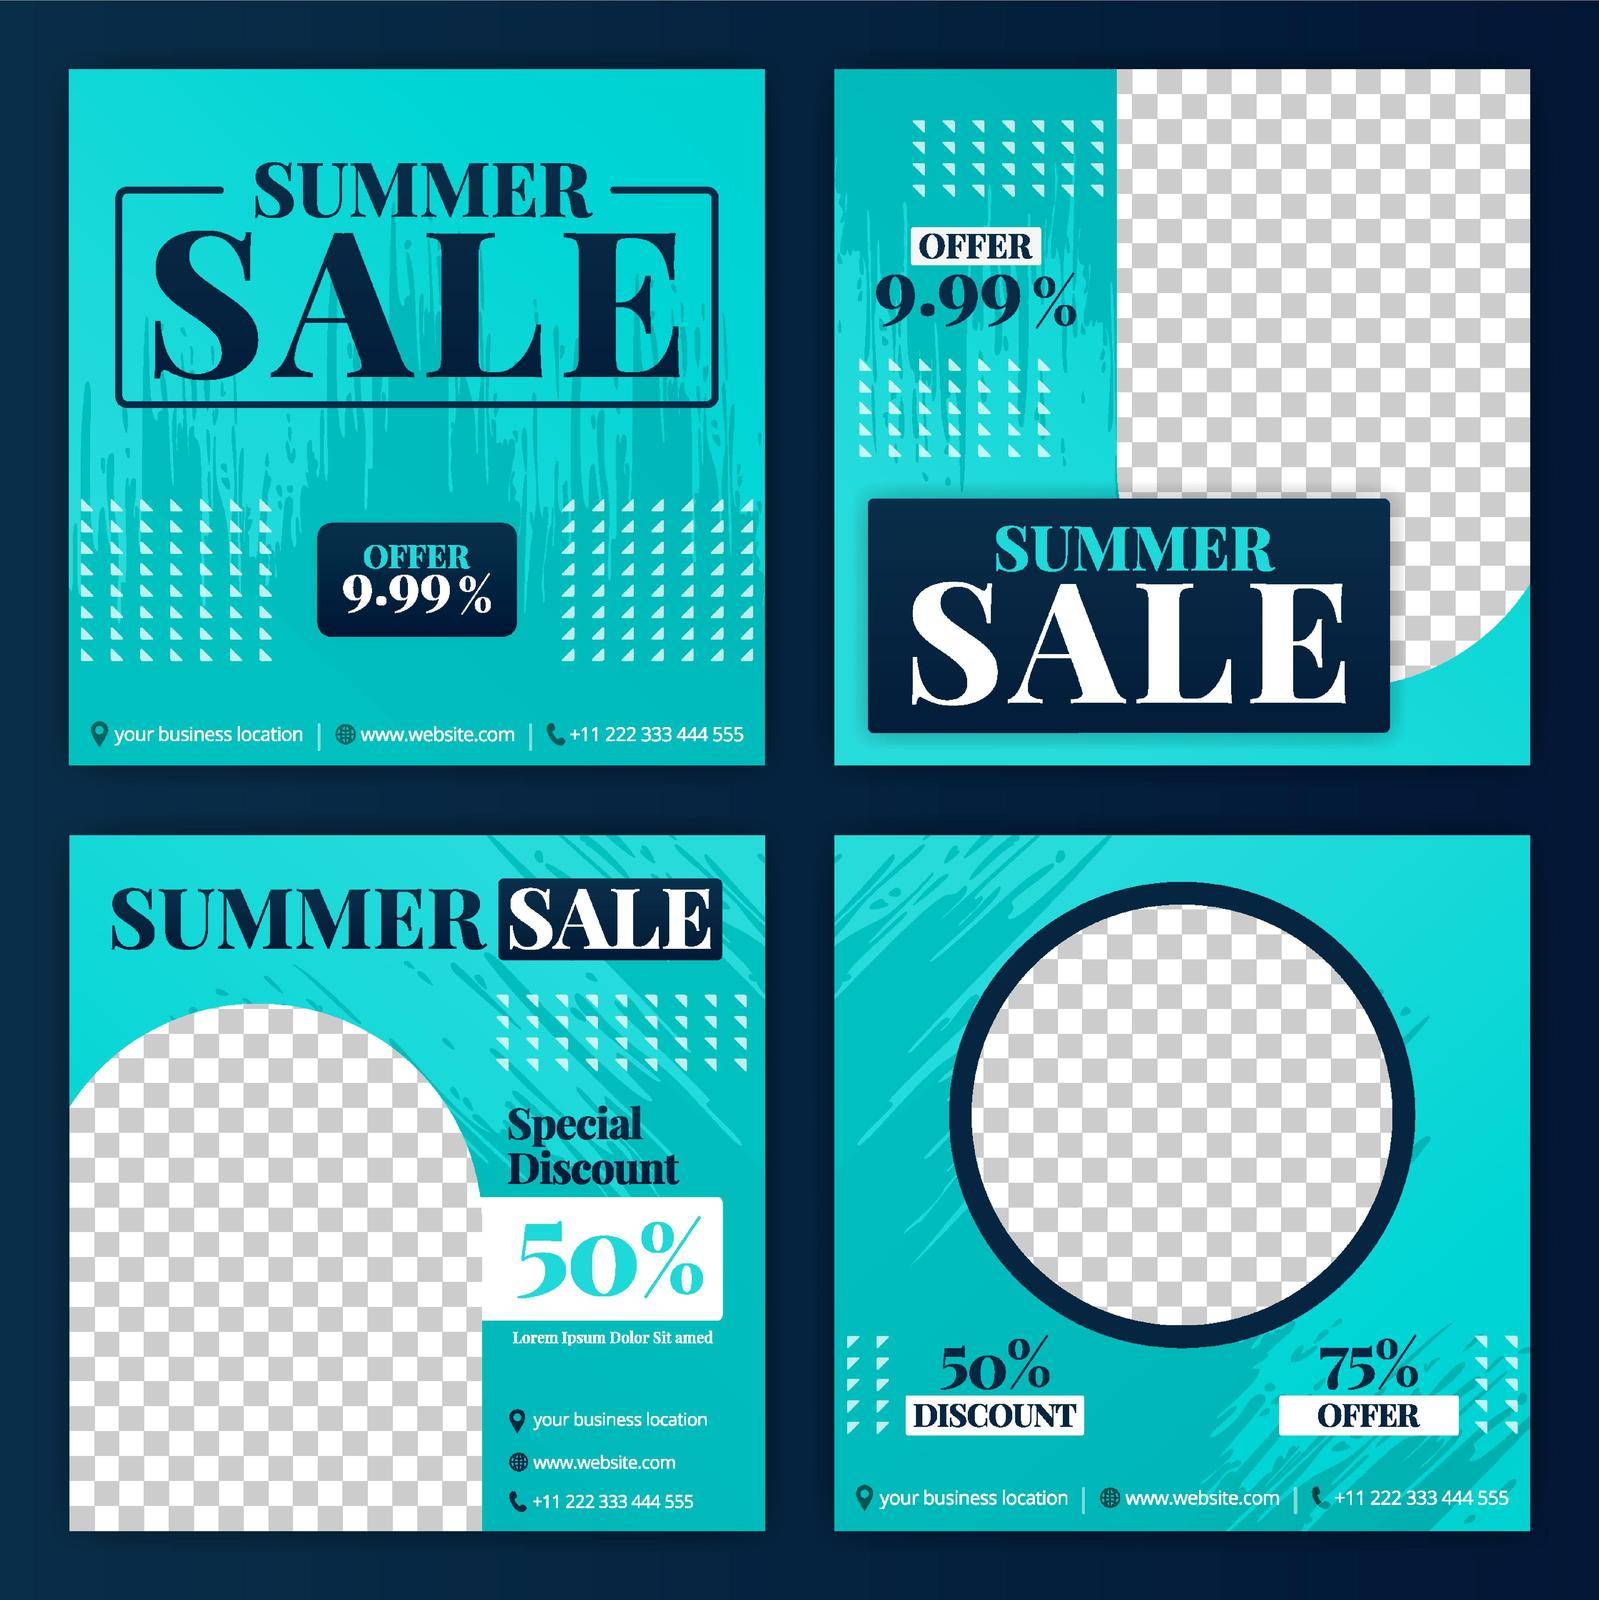 social media post for summer sale in June. new normal sale in summer season ads and promotions. social media marketing during a pandemic. the design can be used for website, post, stories and feed by yayimage